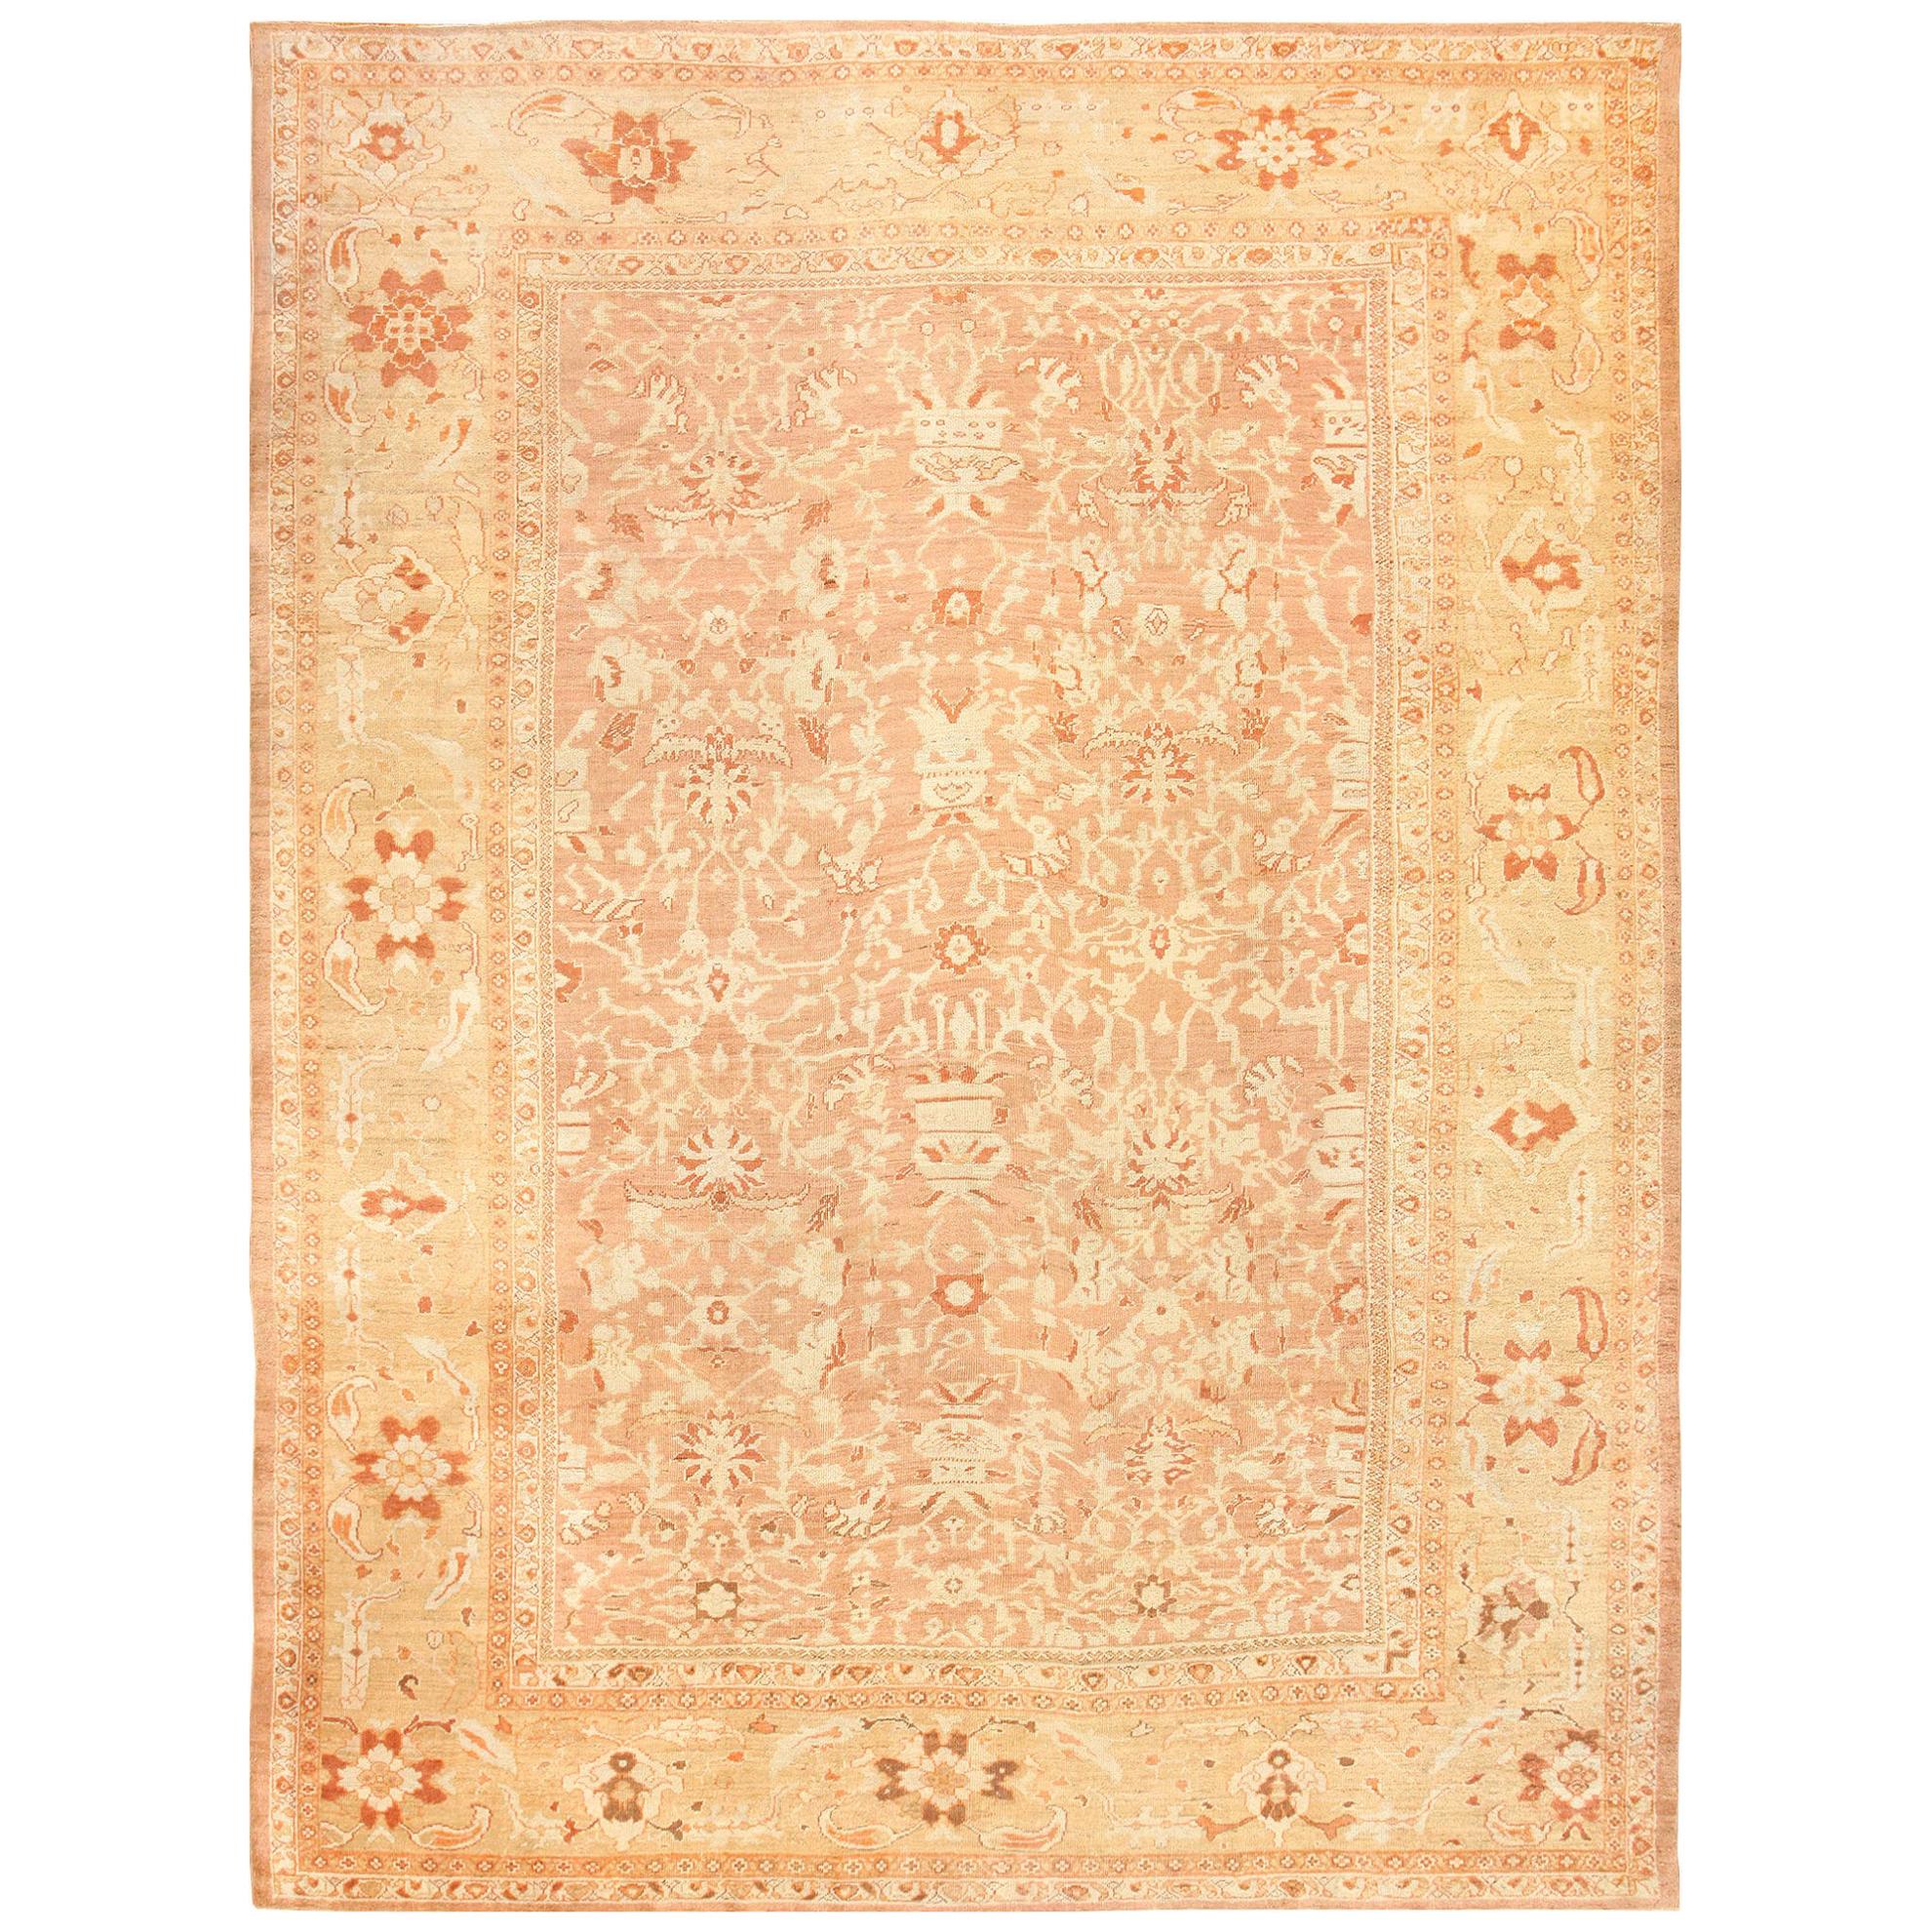 Large Decorative Antique Persian Ziegler Sultanabad Rug. Size: 11 ft x 15 ft